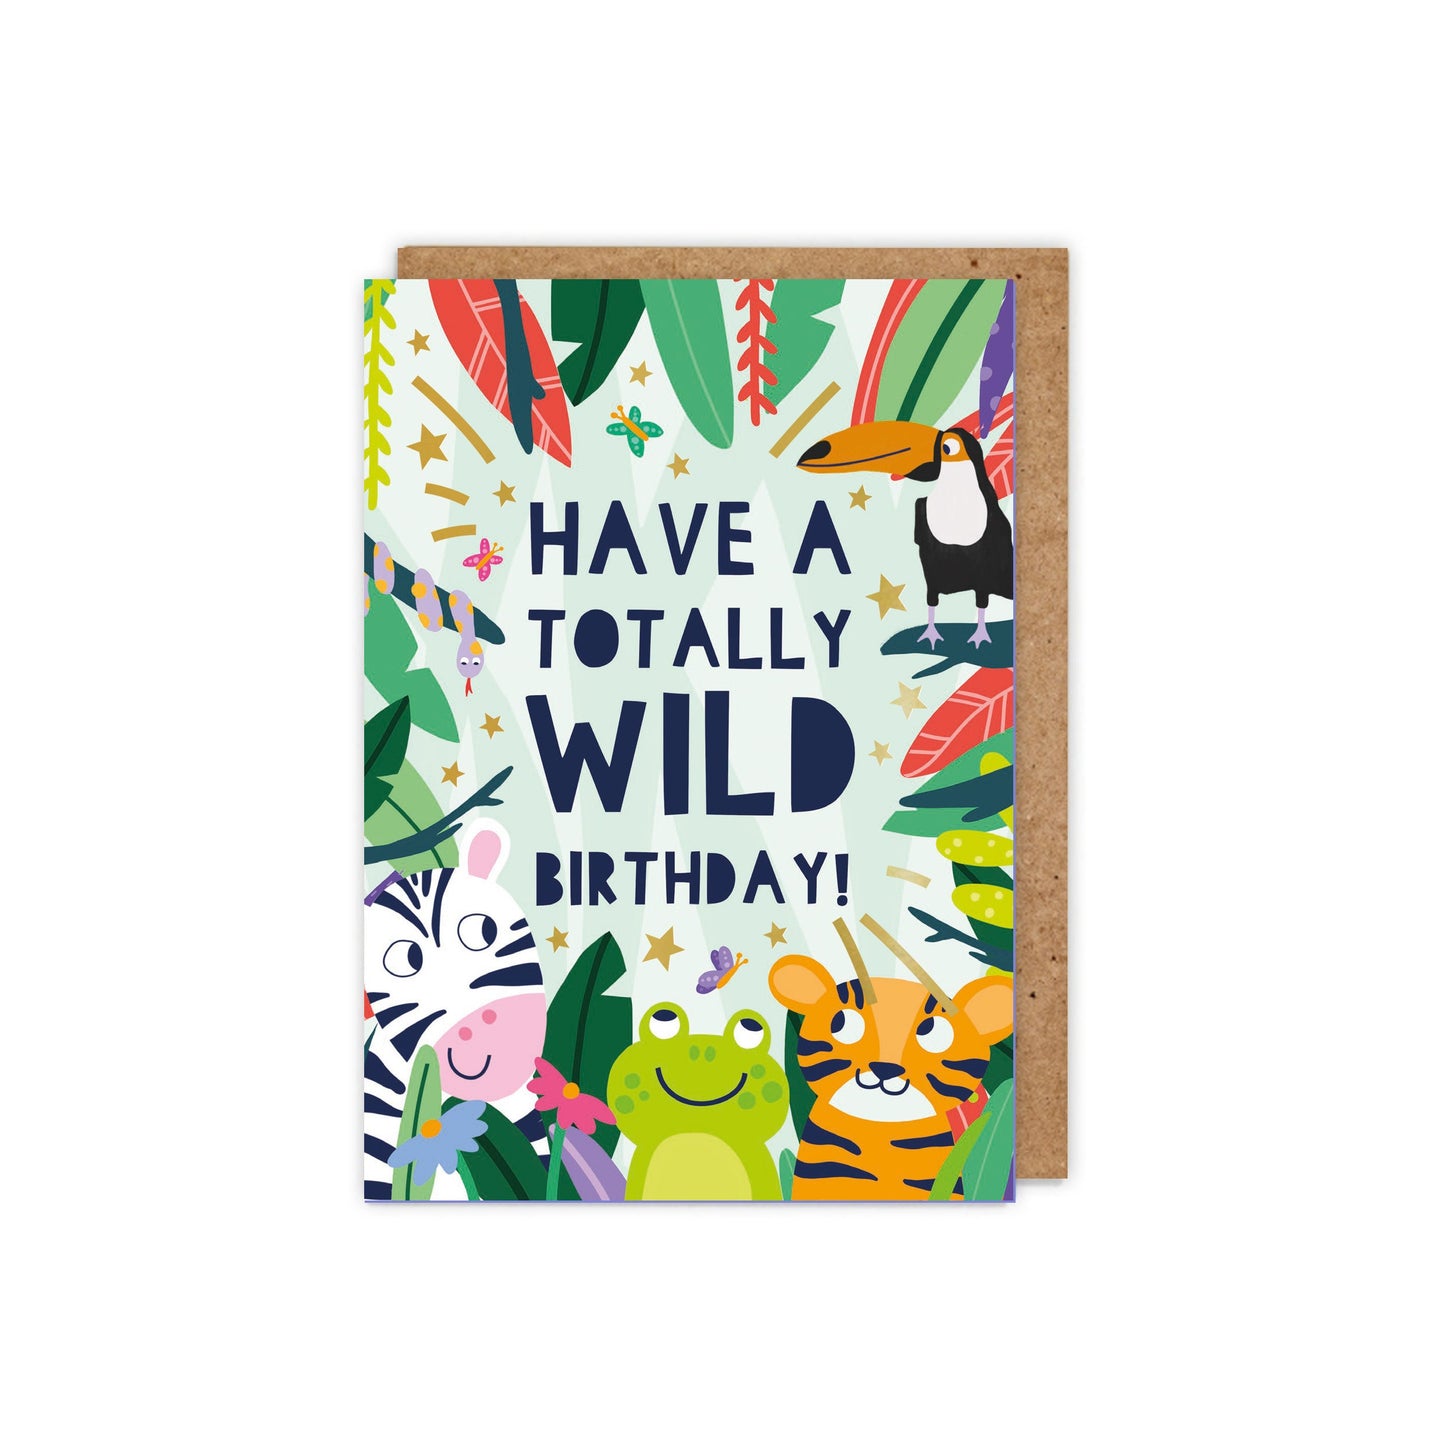 Have a Totally Wild Birthday! Gold Foiled Children's Birthday Card